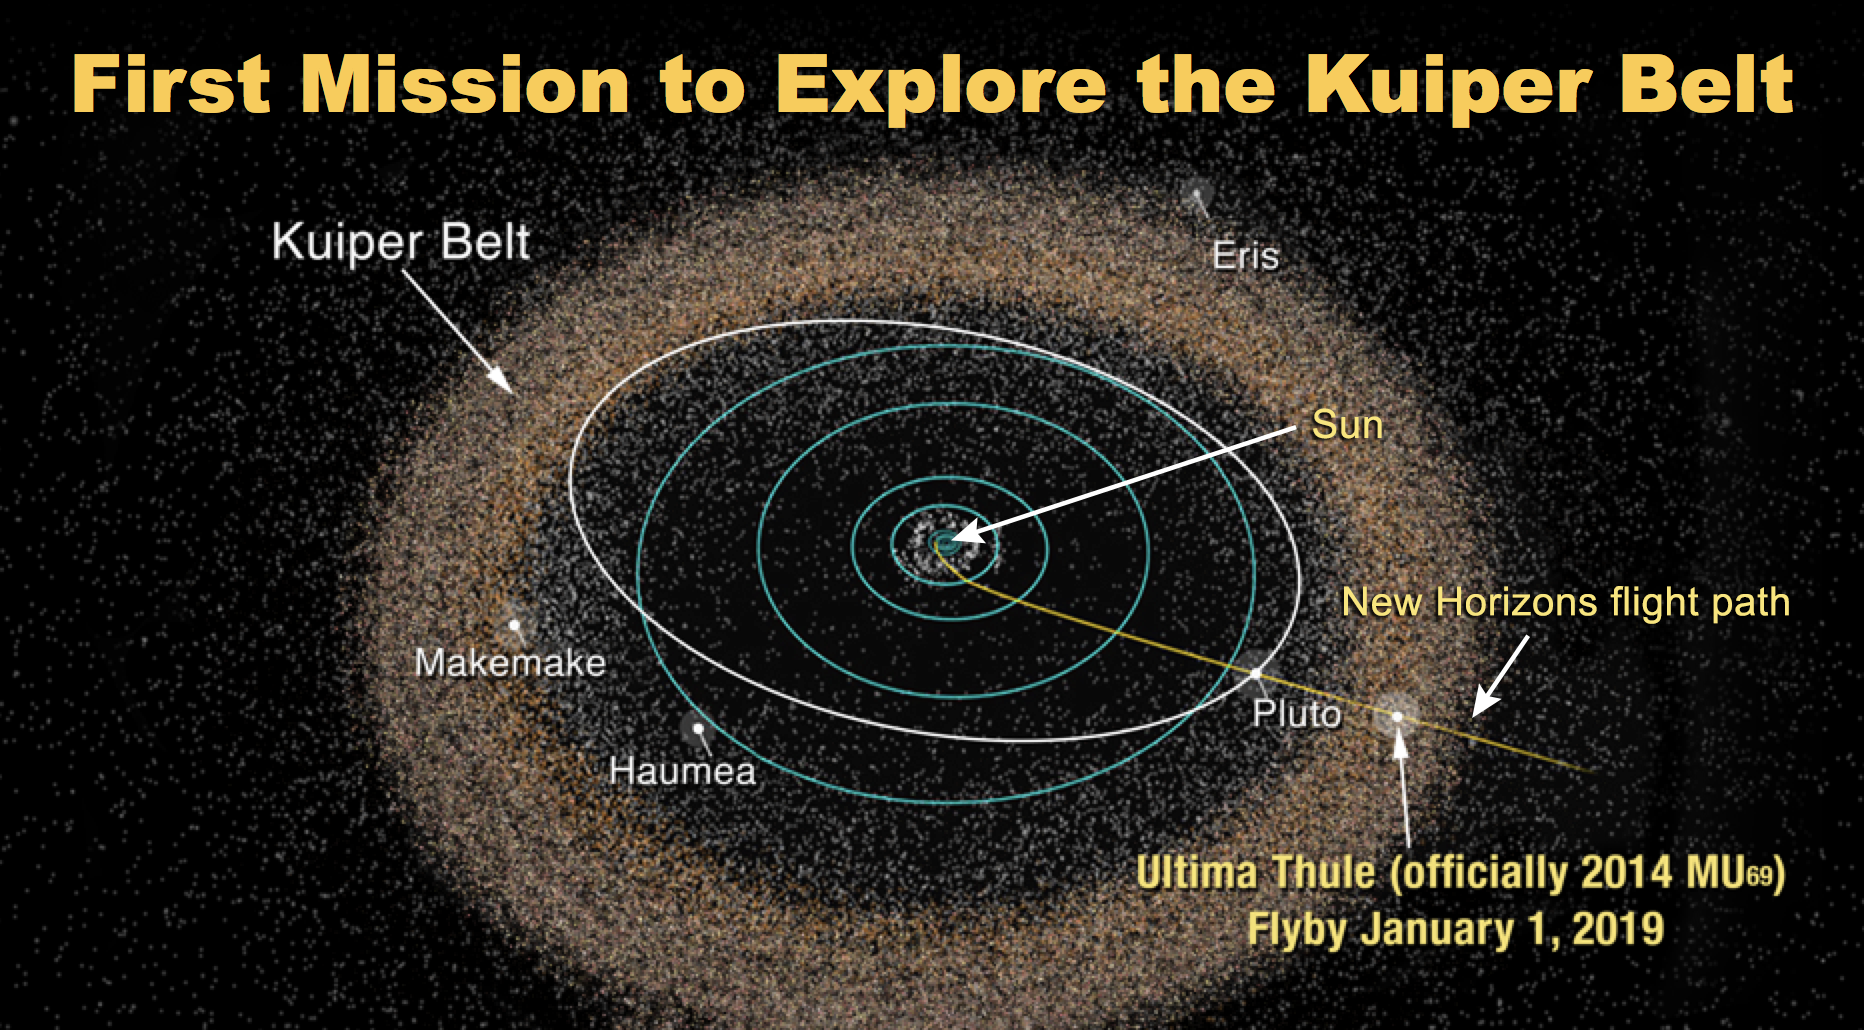 Diagram of first mission to explore the Kuiper Belt